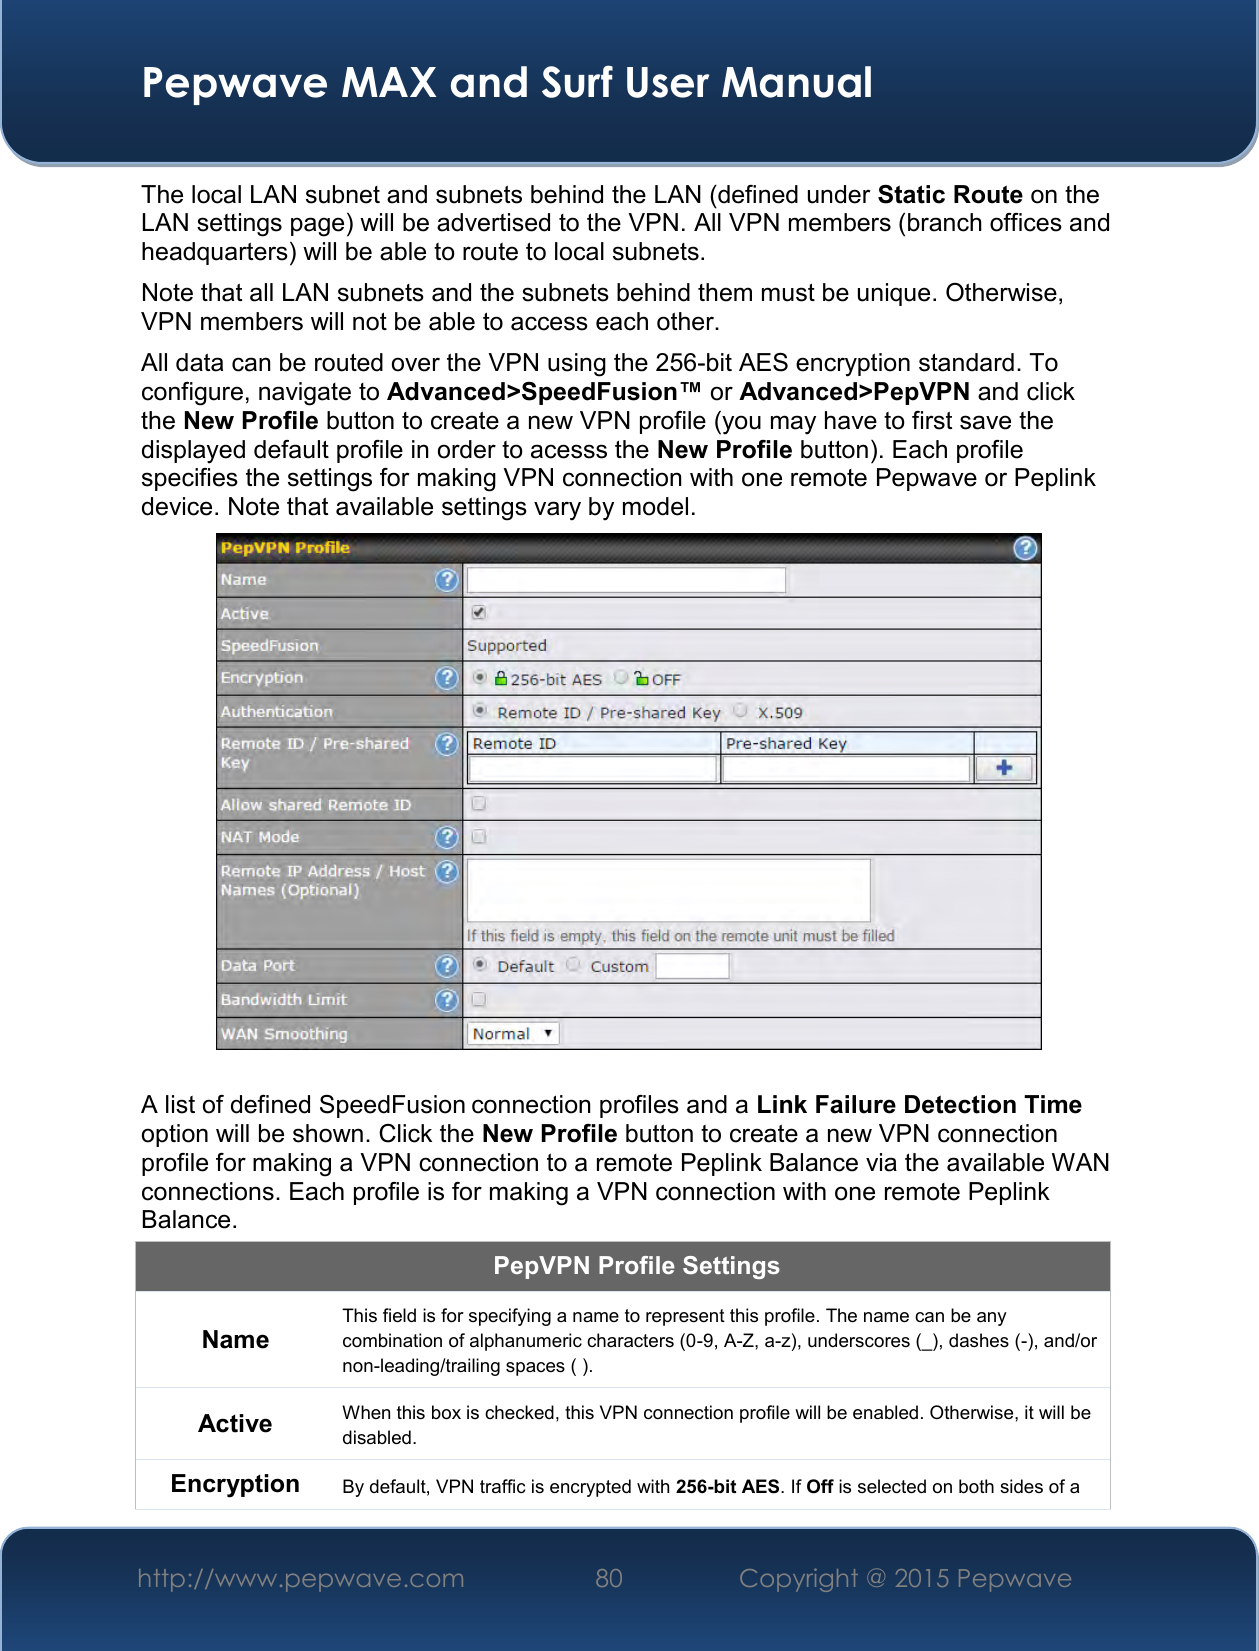  Pepwave MAX and Surf User Manual http://www.pepwave.com 80   Copyright @ 2015 Pepwave   The local LAN subnet and subnets behind the LAN (defined under Static Route on the LAN settings page) will be advertised to the VPN. All VPN members (branch offices and headquarters) will be able to route to local subnets. Note that all LAN subnets and the subnets behind them must be unique. Otherwise, VPN members will not be able to access each other. All data can be routed over the VPN using the 256-bit AES encryption standard. To configure, navigate to Advanced&gt;SpeedFusion™ or Advanced&gt;PepVPN and click the New Profile button to create a new VPN profile (you may have to first save the displayed default profile in order to acesss the New Profile button). Each profile specifies the settings for making VPN connection with one remote Pepwave or Peplink device. Note that available settings vary by model.   A list of defined SpeedFusion connection profiles and a Link Failure Detection Time option will be shown. Click the New Profile button to create a new VPN connection profile for making a VPN connection to a remote Peplink Balance via the available WAN connections. Each profile is for making a VPN connection with one remote Peplink Balance. PepVPN Profile Settings Name This field is for specifying a name to represent this profile. The name can be any combination of alphanumeric characters (0-9, A-Z, a-z), underscores (_), dashes (-), and/or non-leading/trailing spaces ( ). Active When this box is checked, this VPN connection profile will be enabled. Otherwise, it will be disabled. Encryption By default, VPN traffic is encrypted with 256-bit AES. If Off is selected on both sides of a 